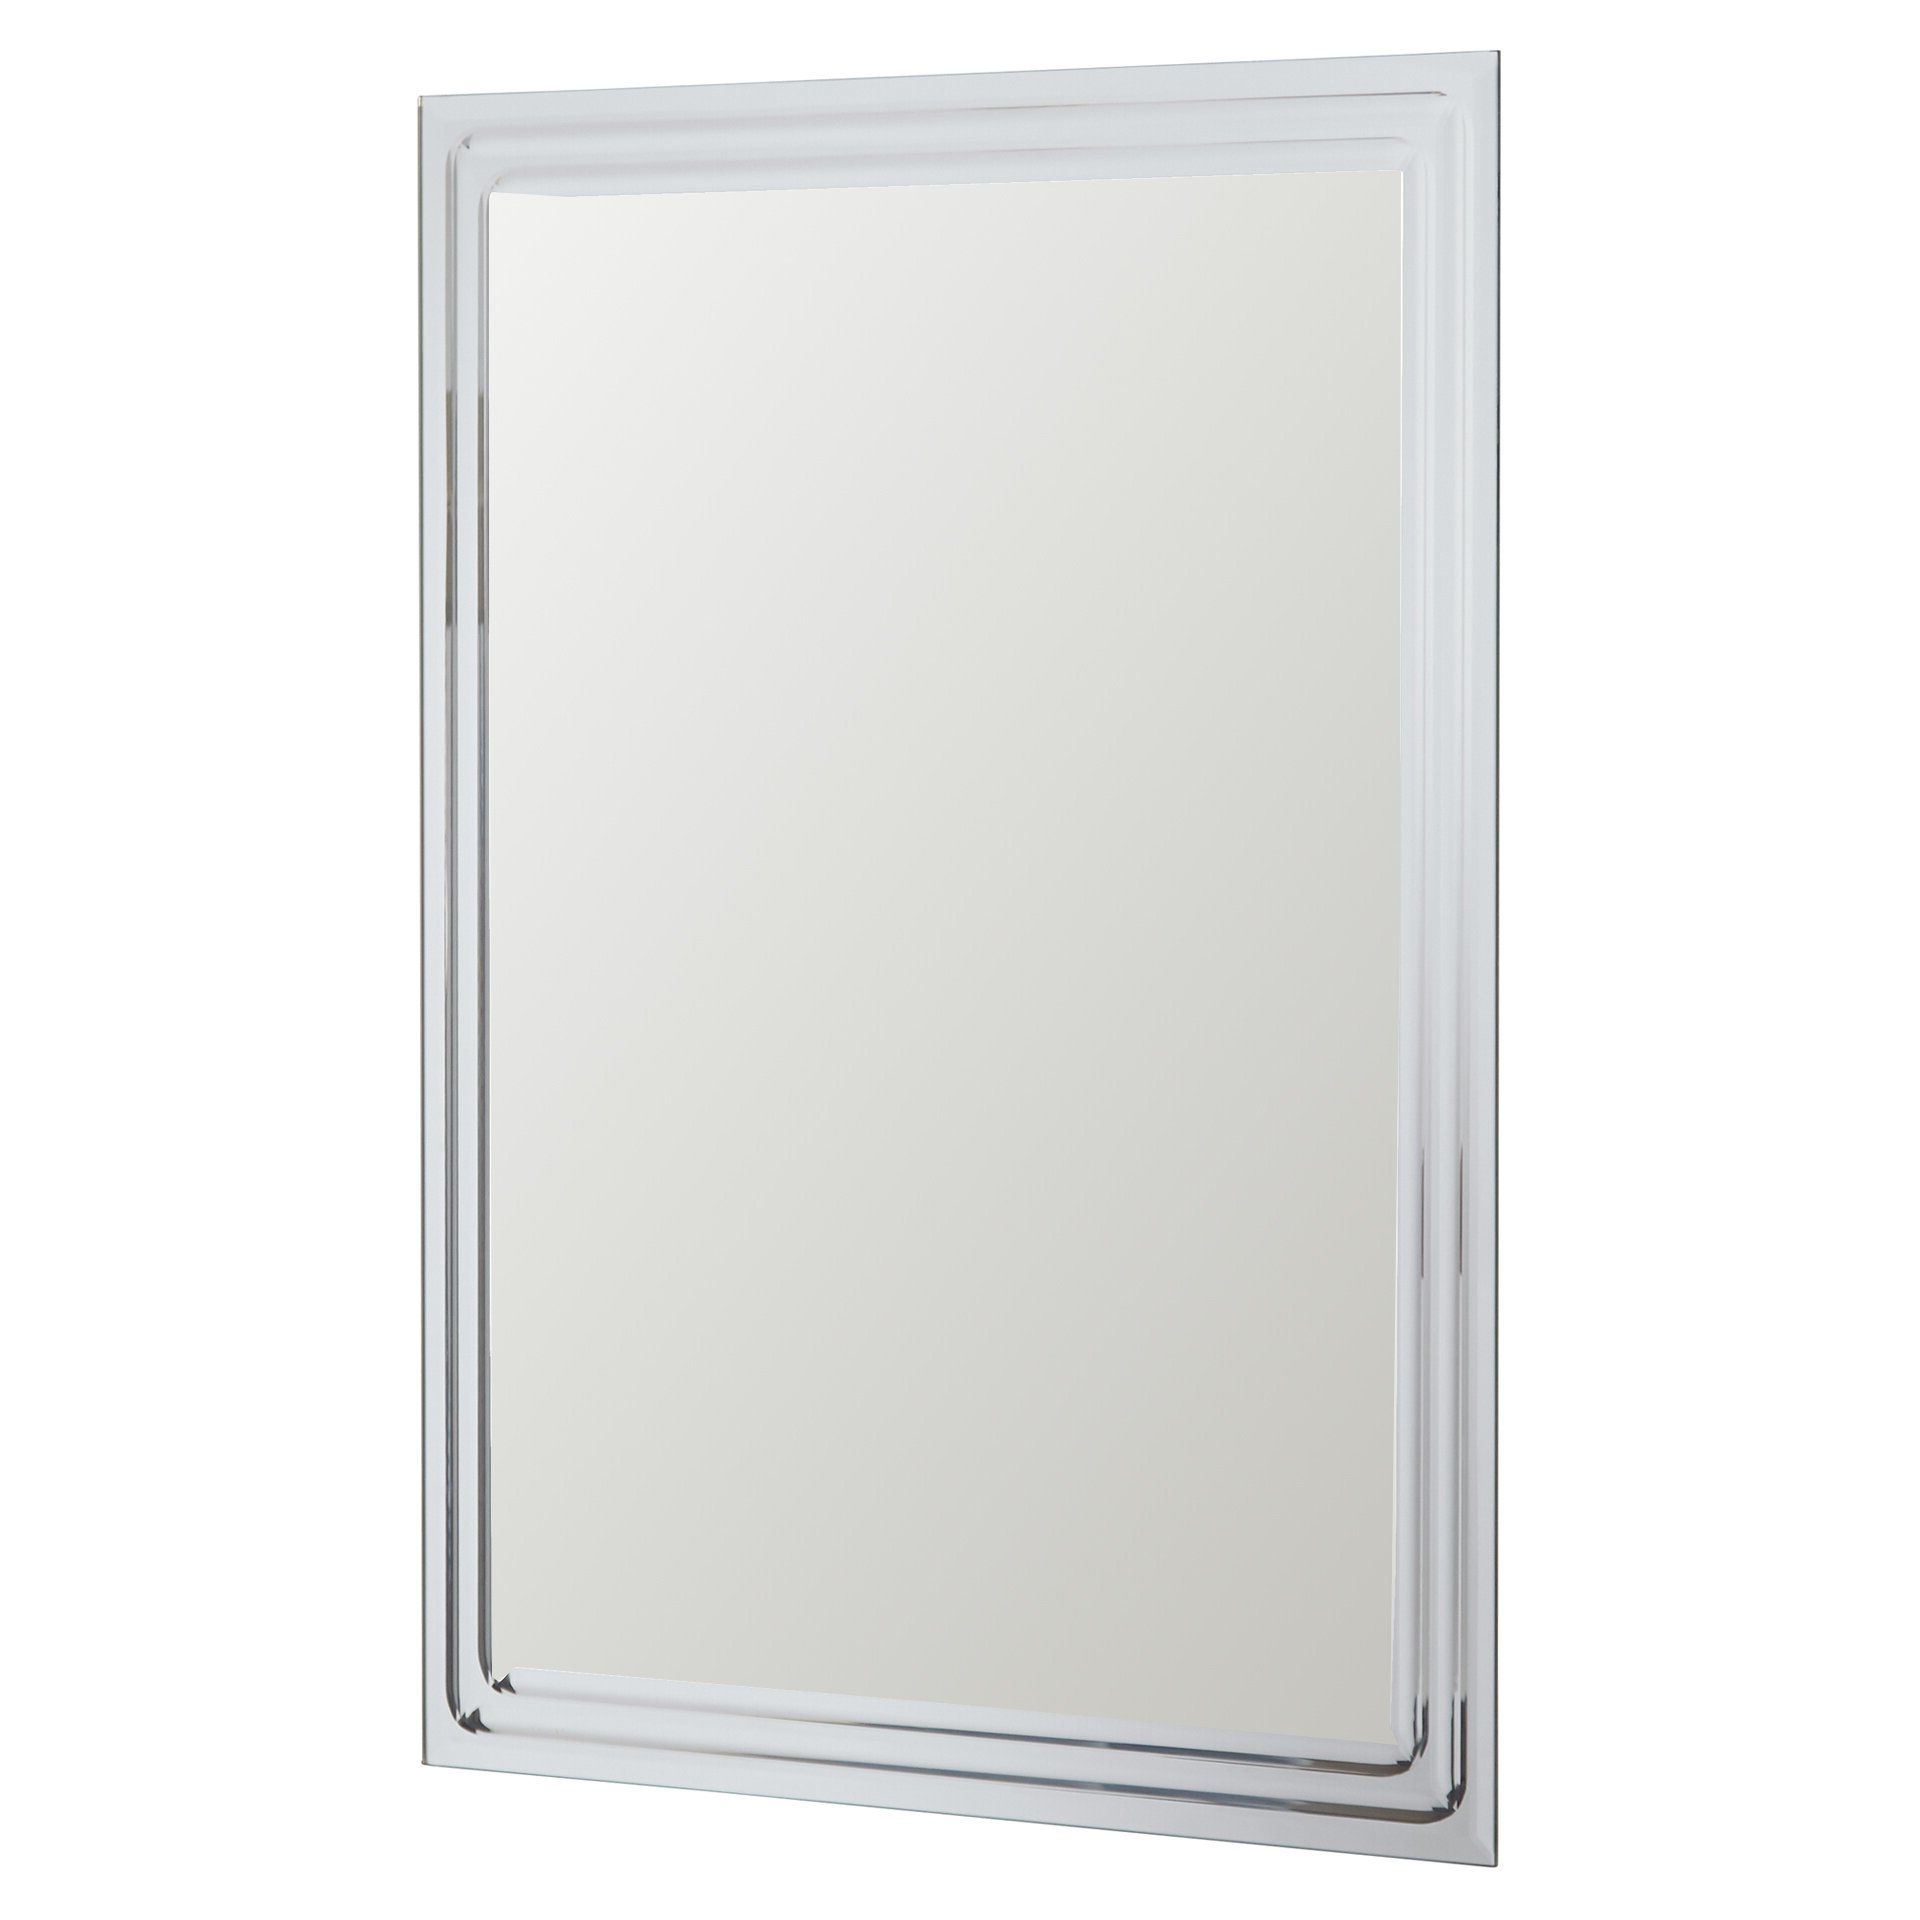 Wayfair With Well Liked Square Frameless Beveled Wall Mirrors (View 10 of 15)